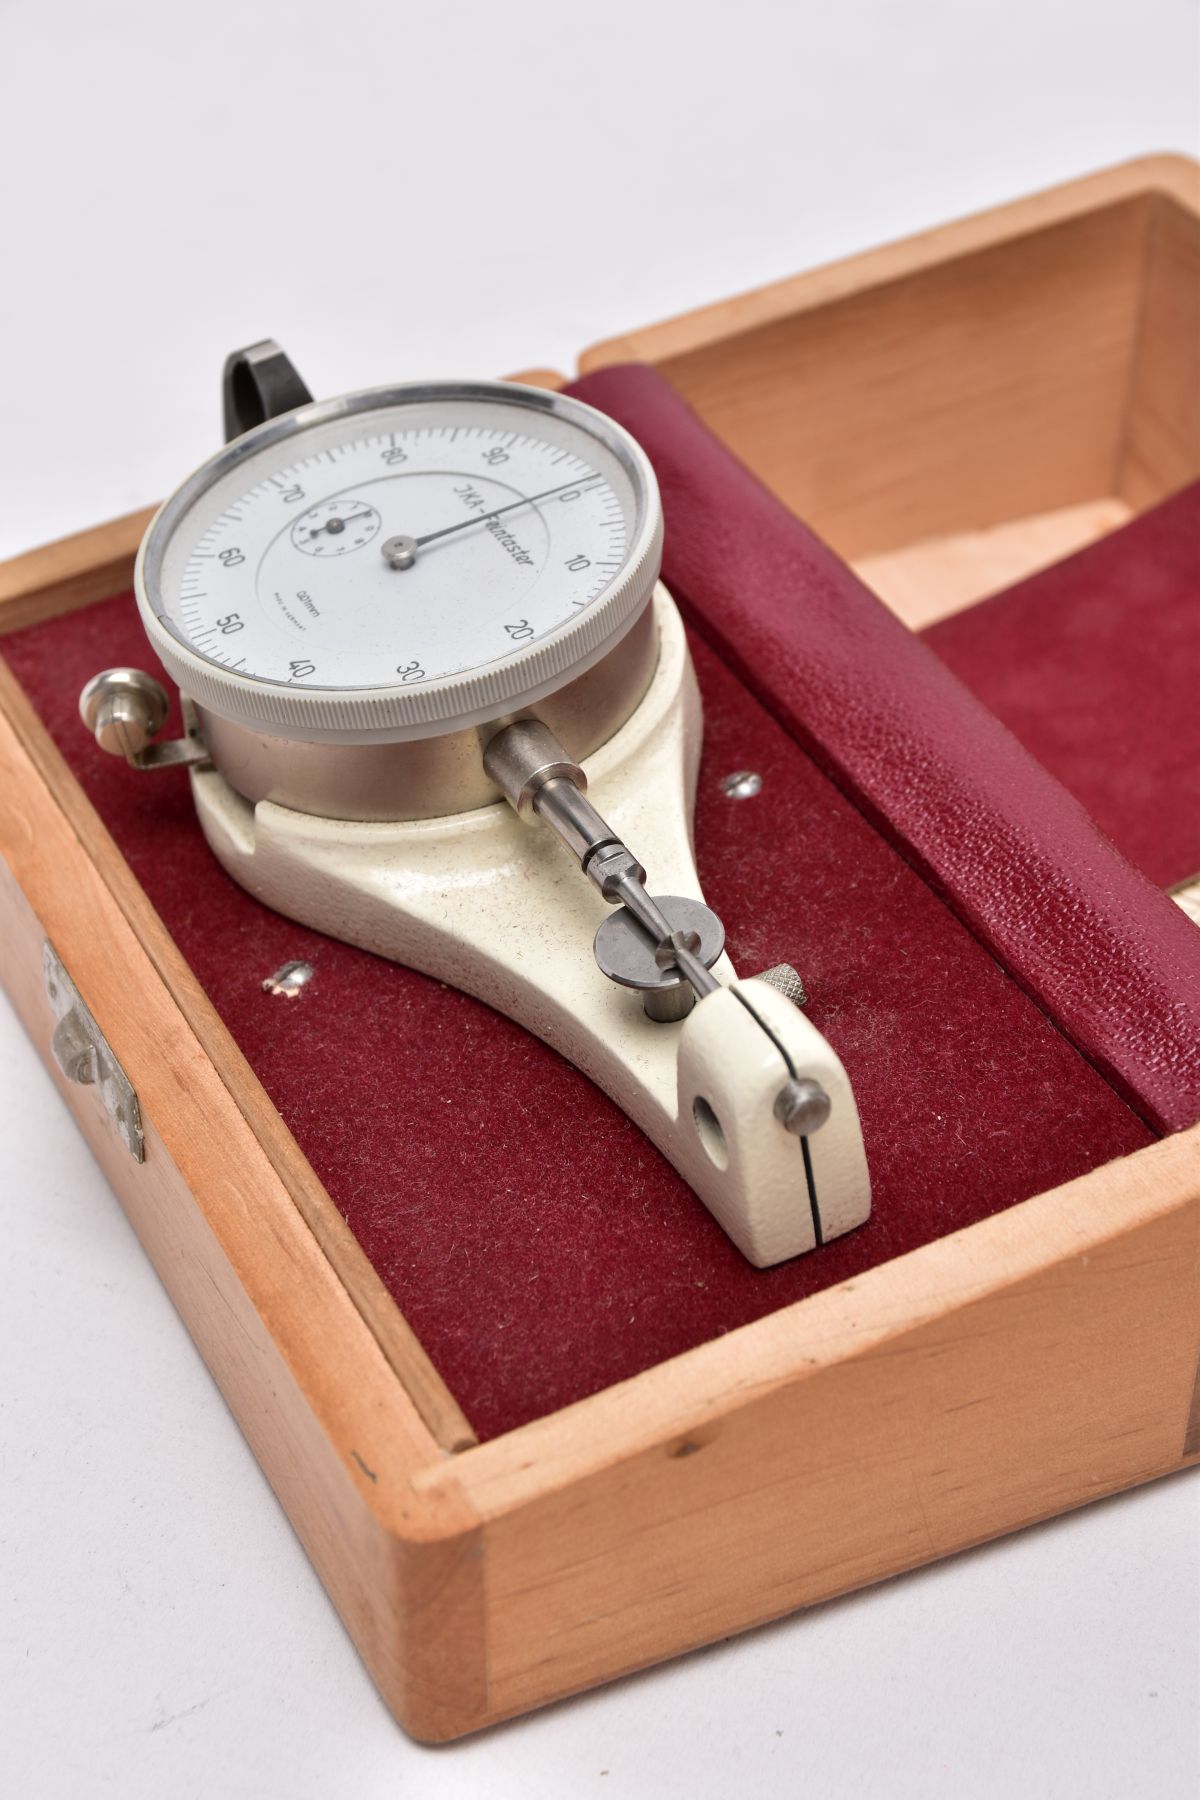 A 'JKA FEINTASTER' PRECISION MIRCOMETER DIAL GAUGE, fitted within original box - Image 9 of 12